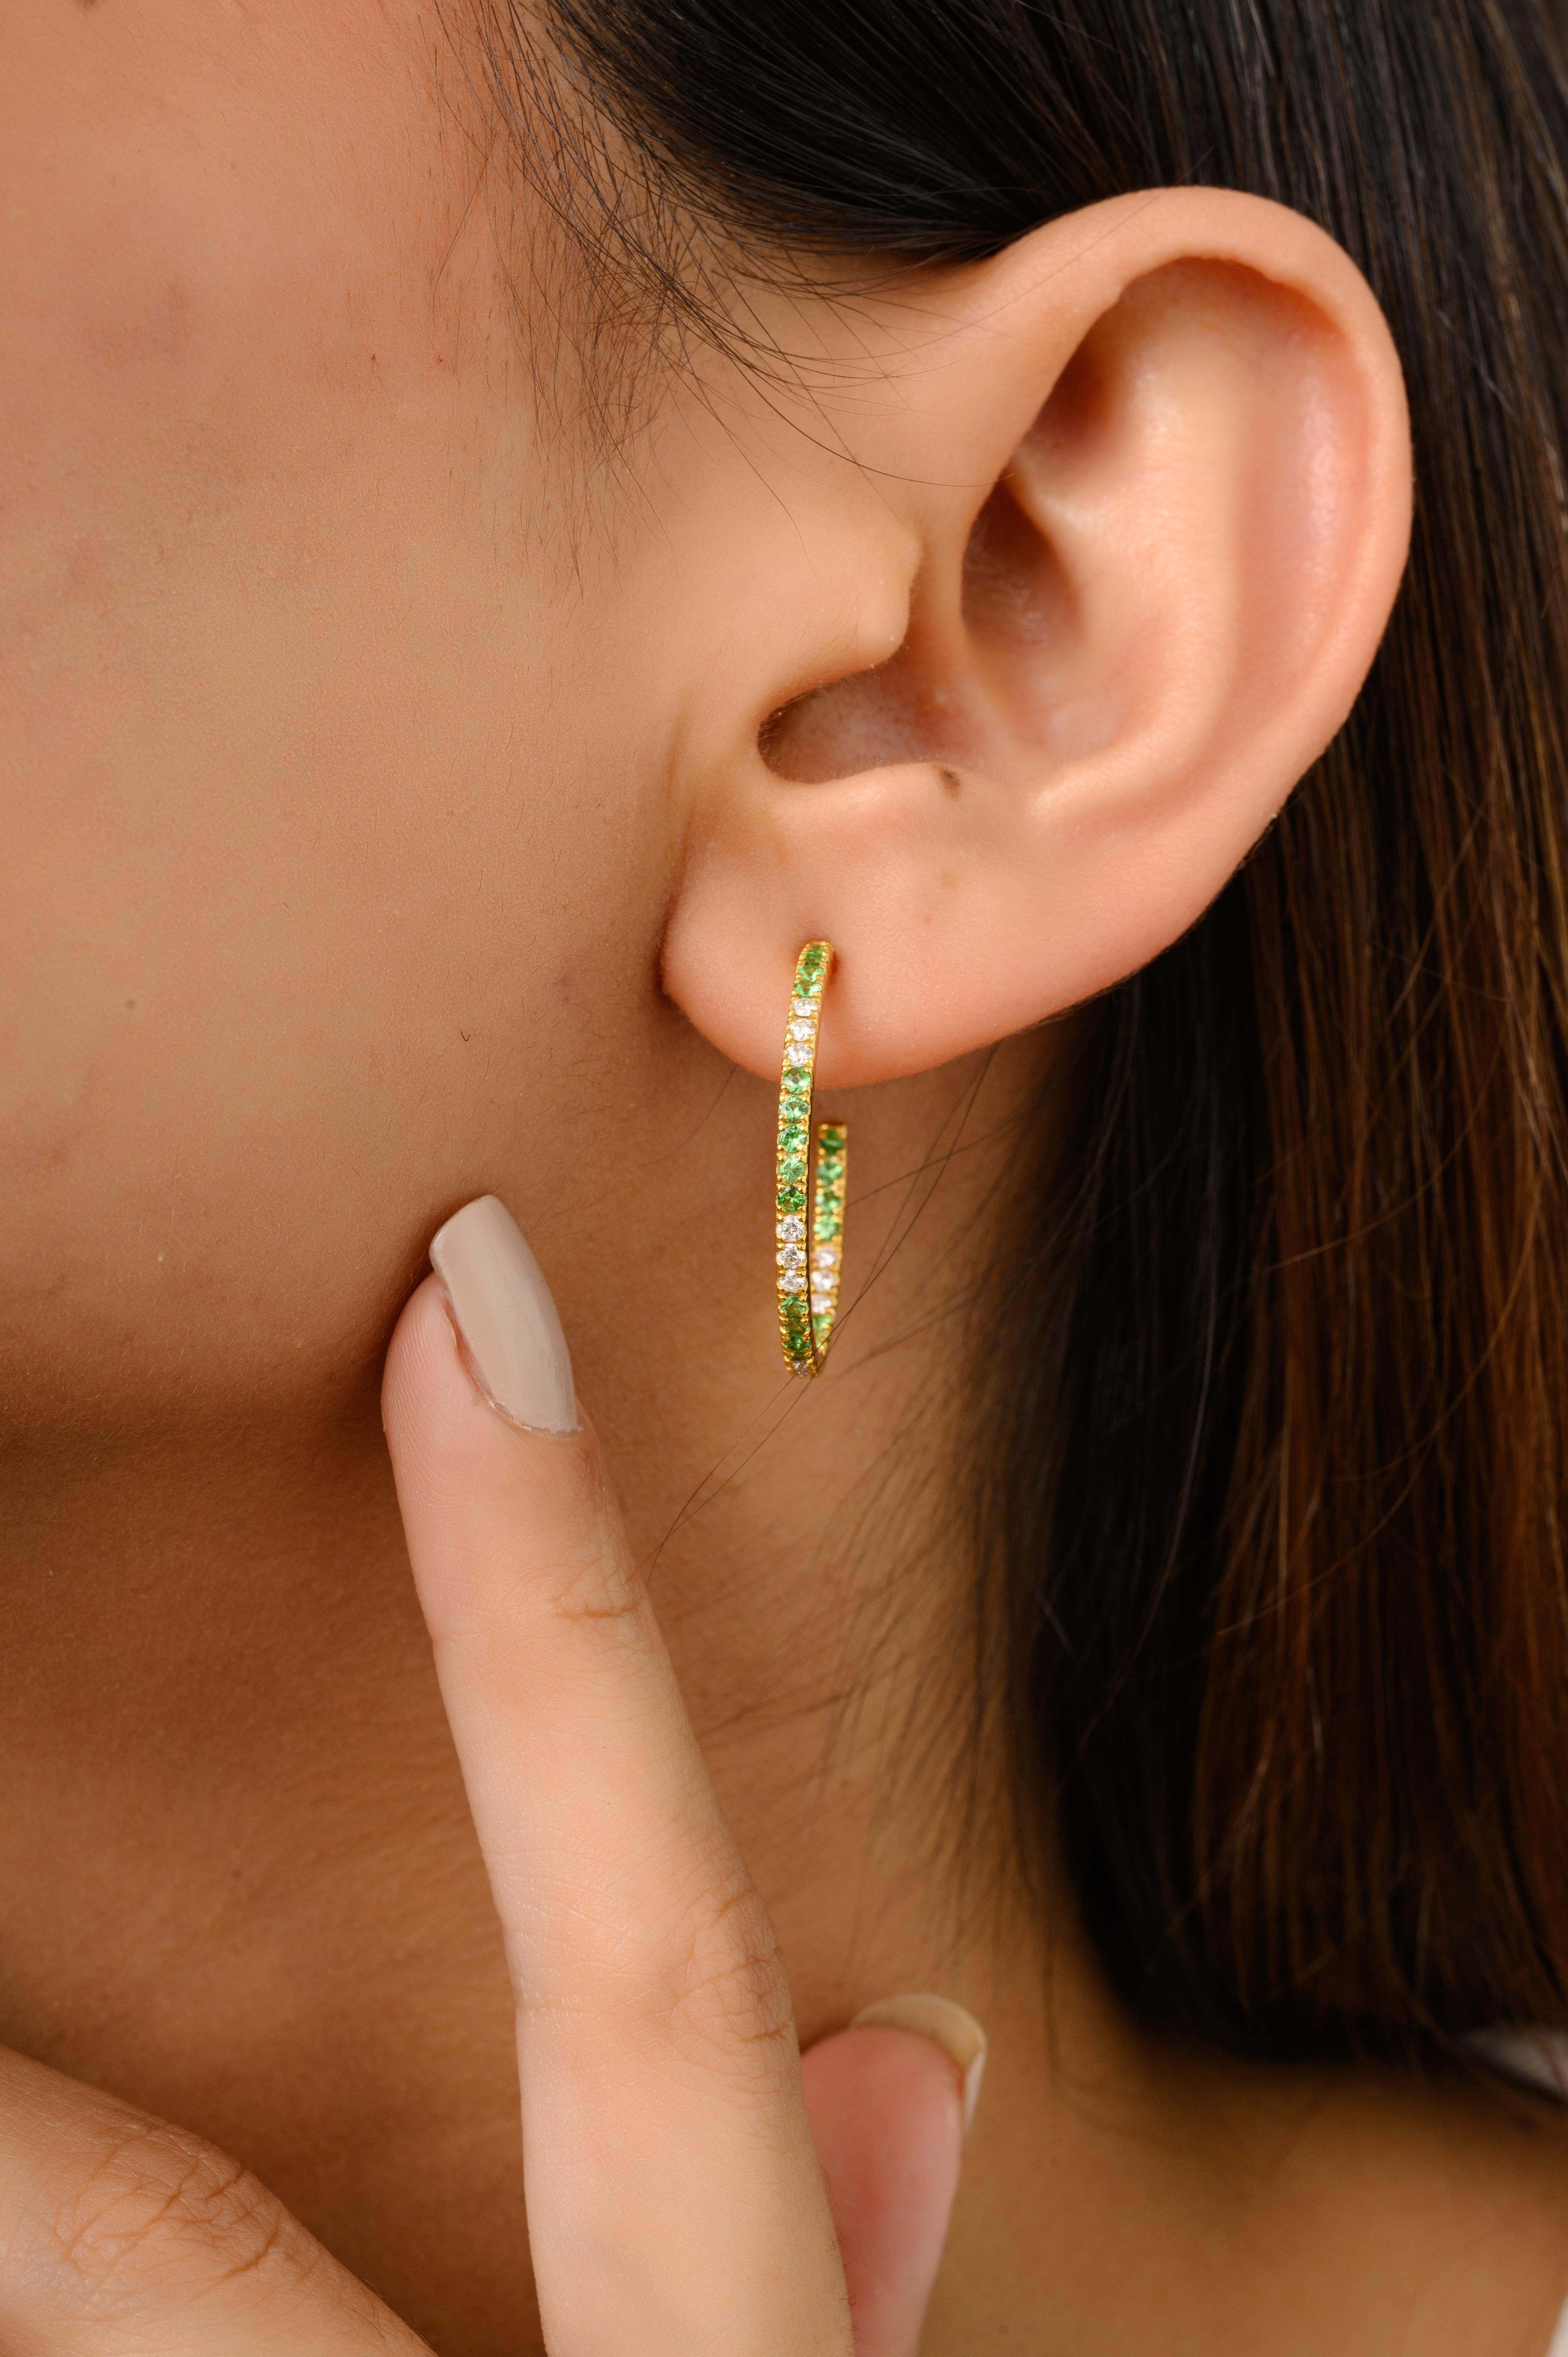 Tsavorite Gemstone and Diamond Thin C-Hoops in 18K Gold to make a statement with your look. You shall need hoop earrings to make a statement with your look. These earrings create a sparkling, luxurious look featuring round cut tsavorite and